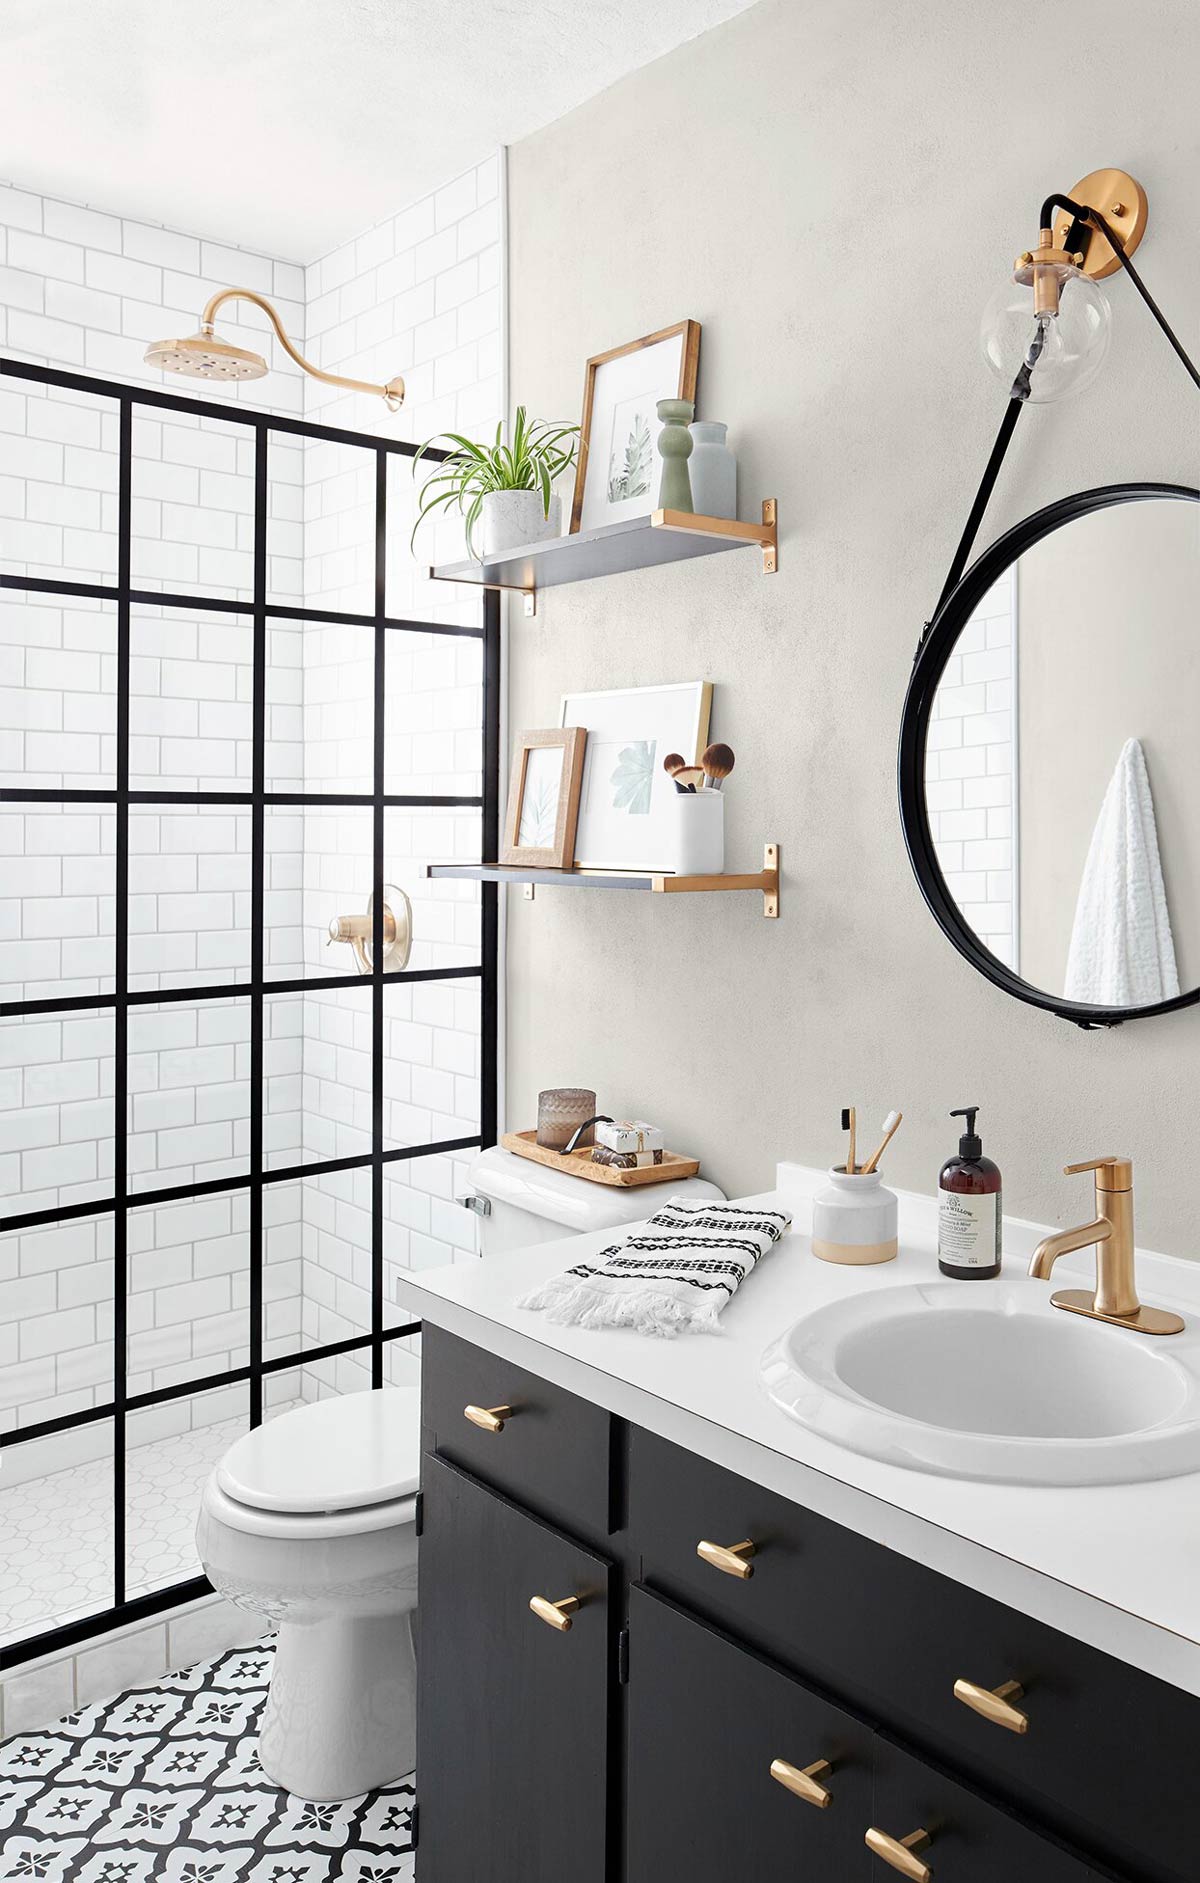 22 Stunning Walk-In Shower Ideas For Small Bathrooms, 57% OFF